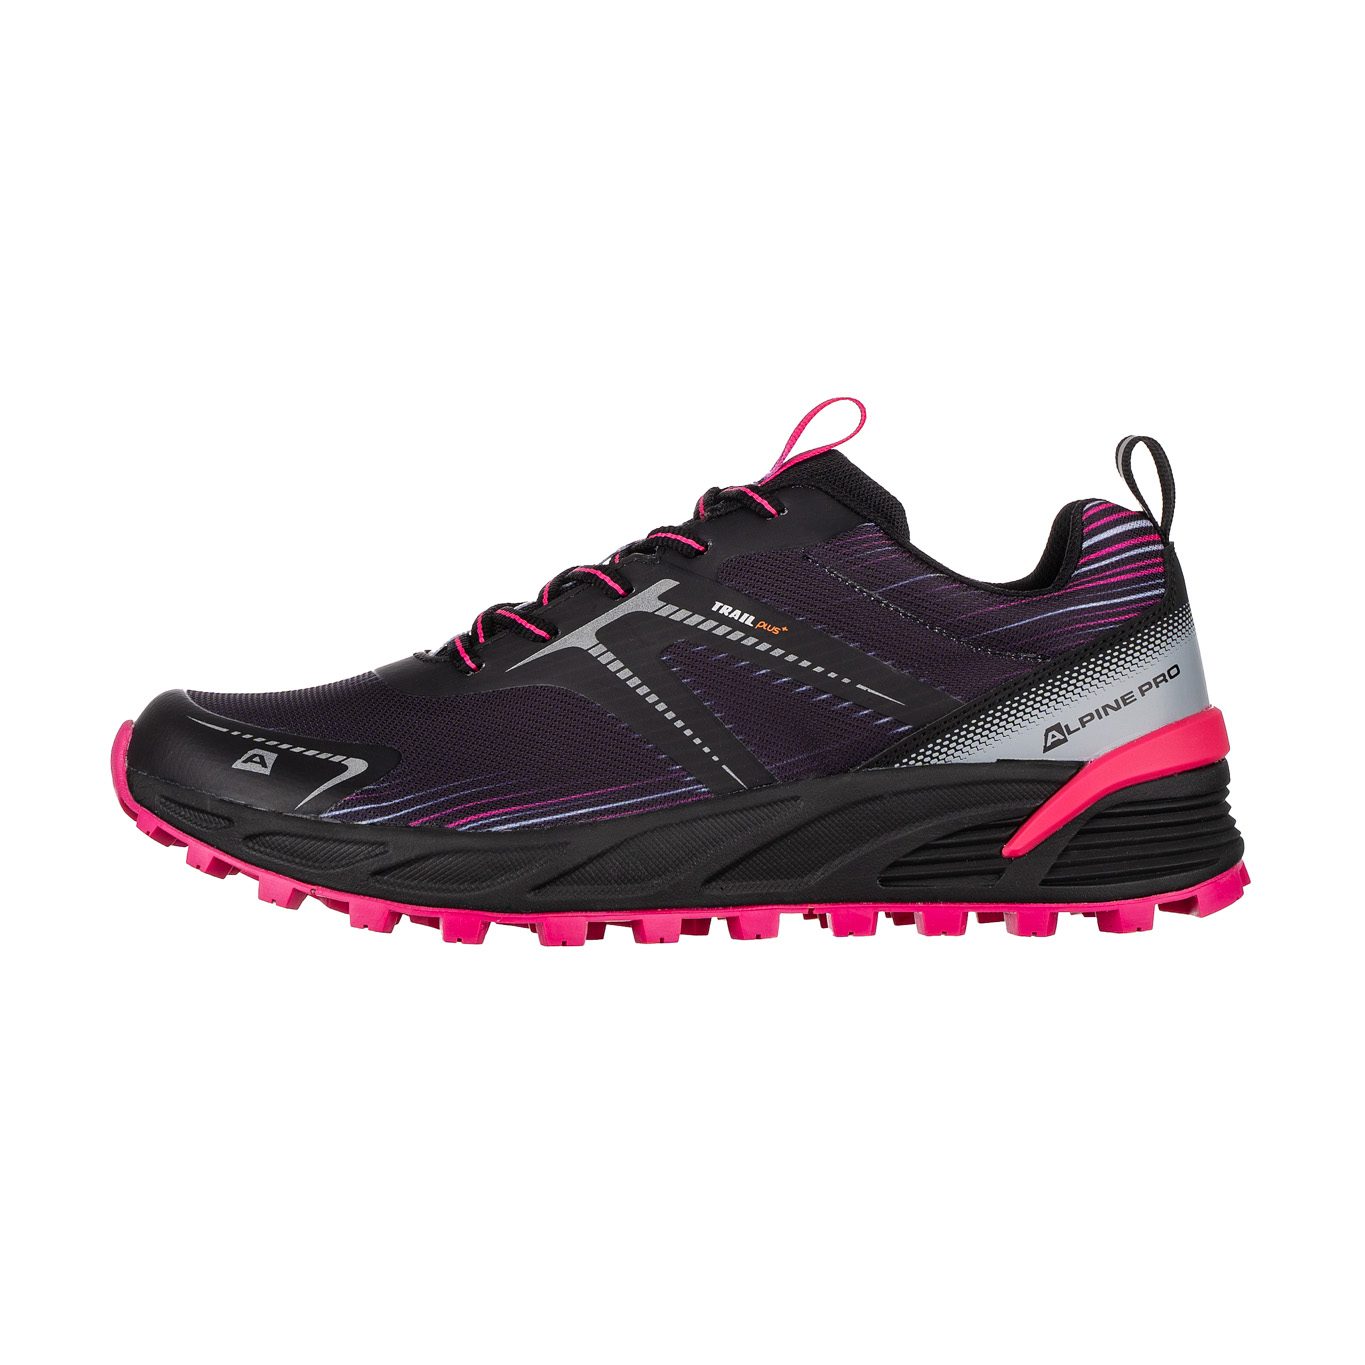 Sport shoes with antibacterial insole ALPINE PRO HERMONE cabaret